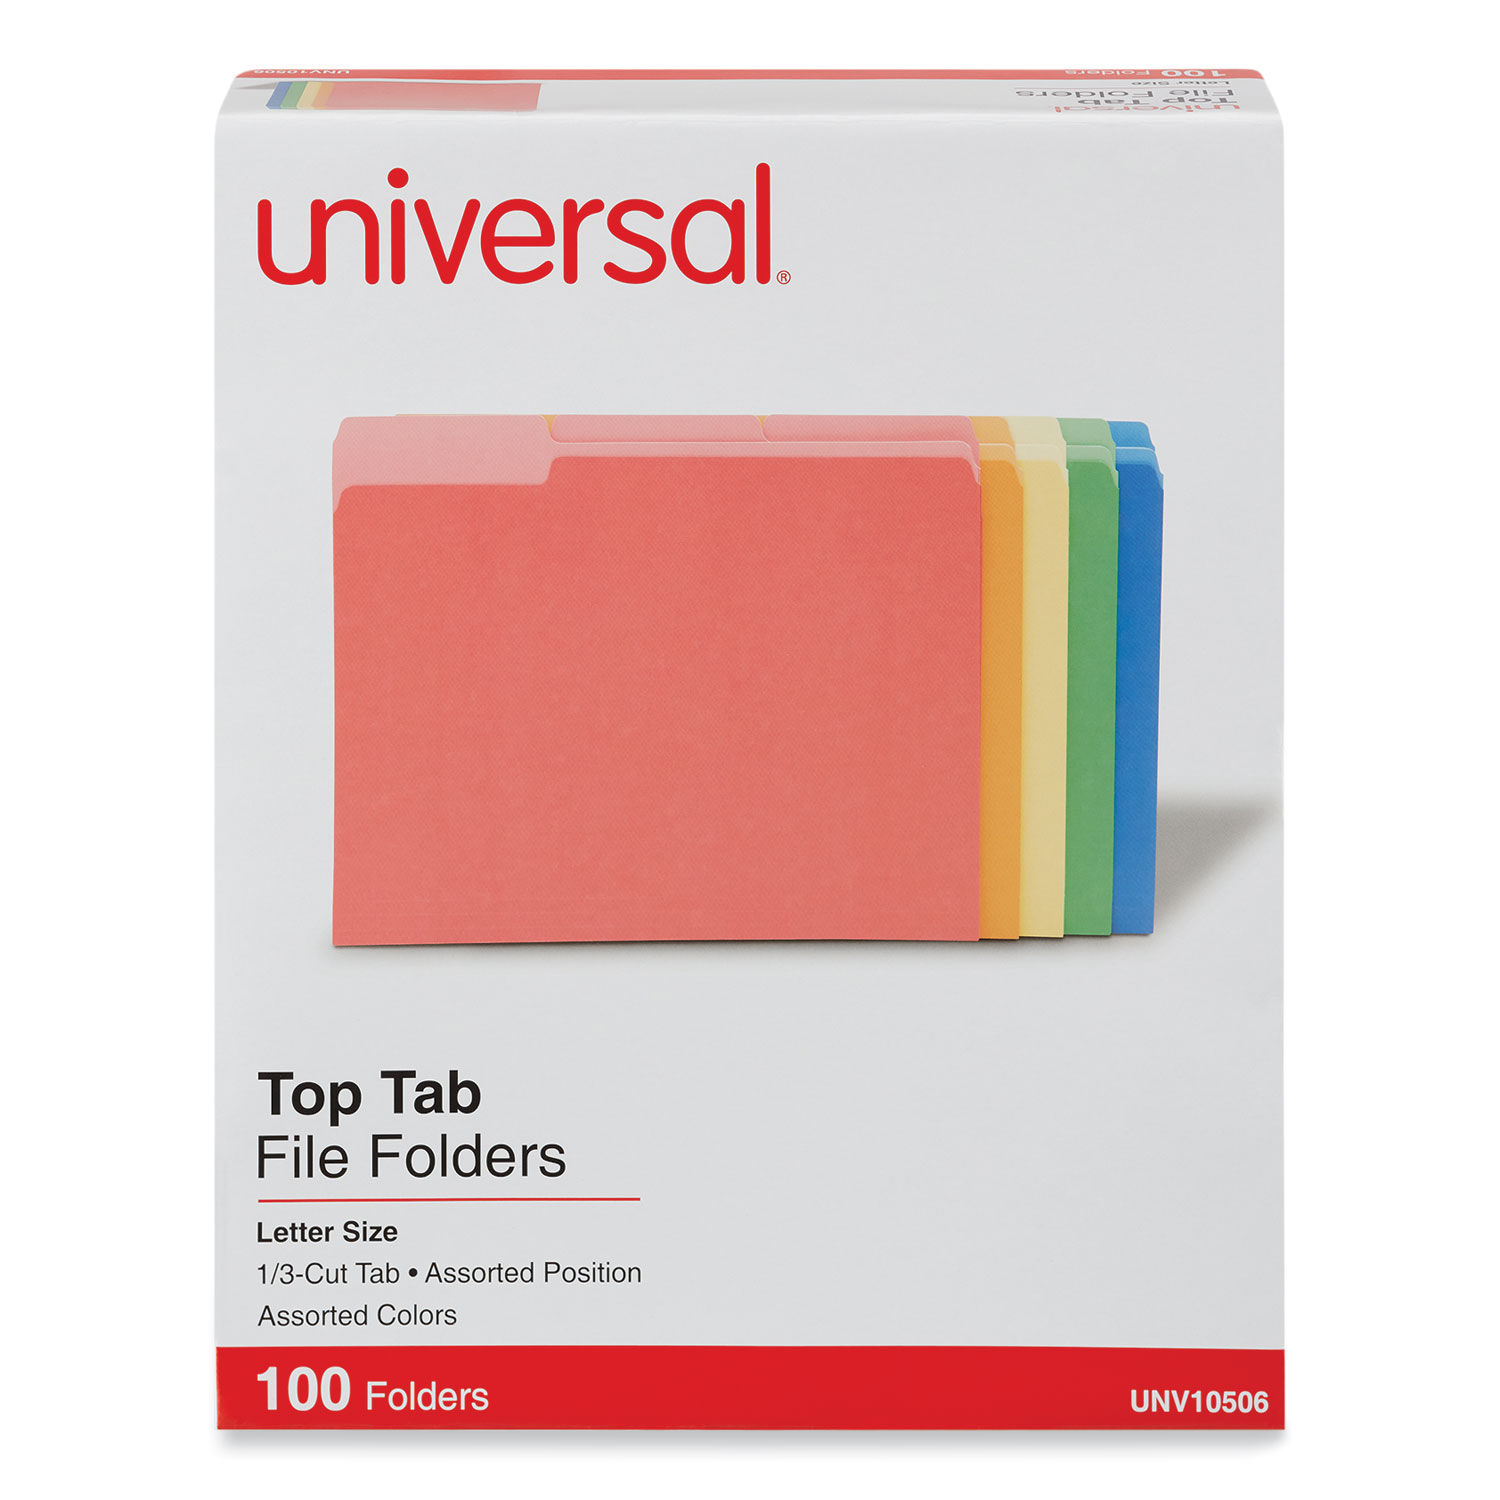 Deluxe Colored Top Tab File Folders by Universalandreg; UNV10506